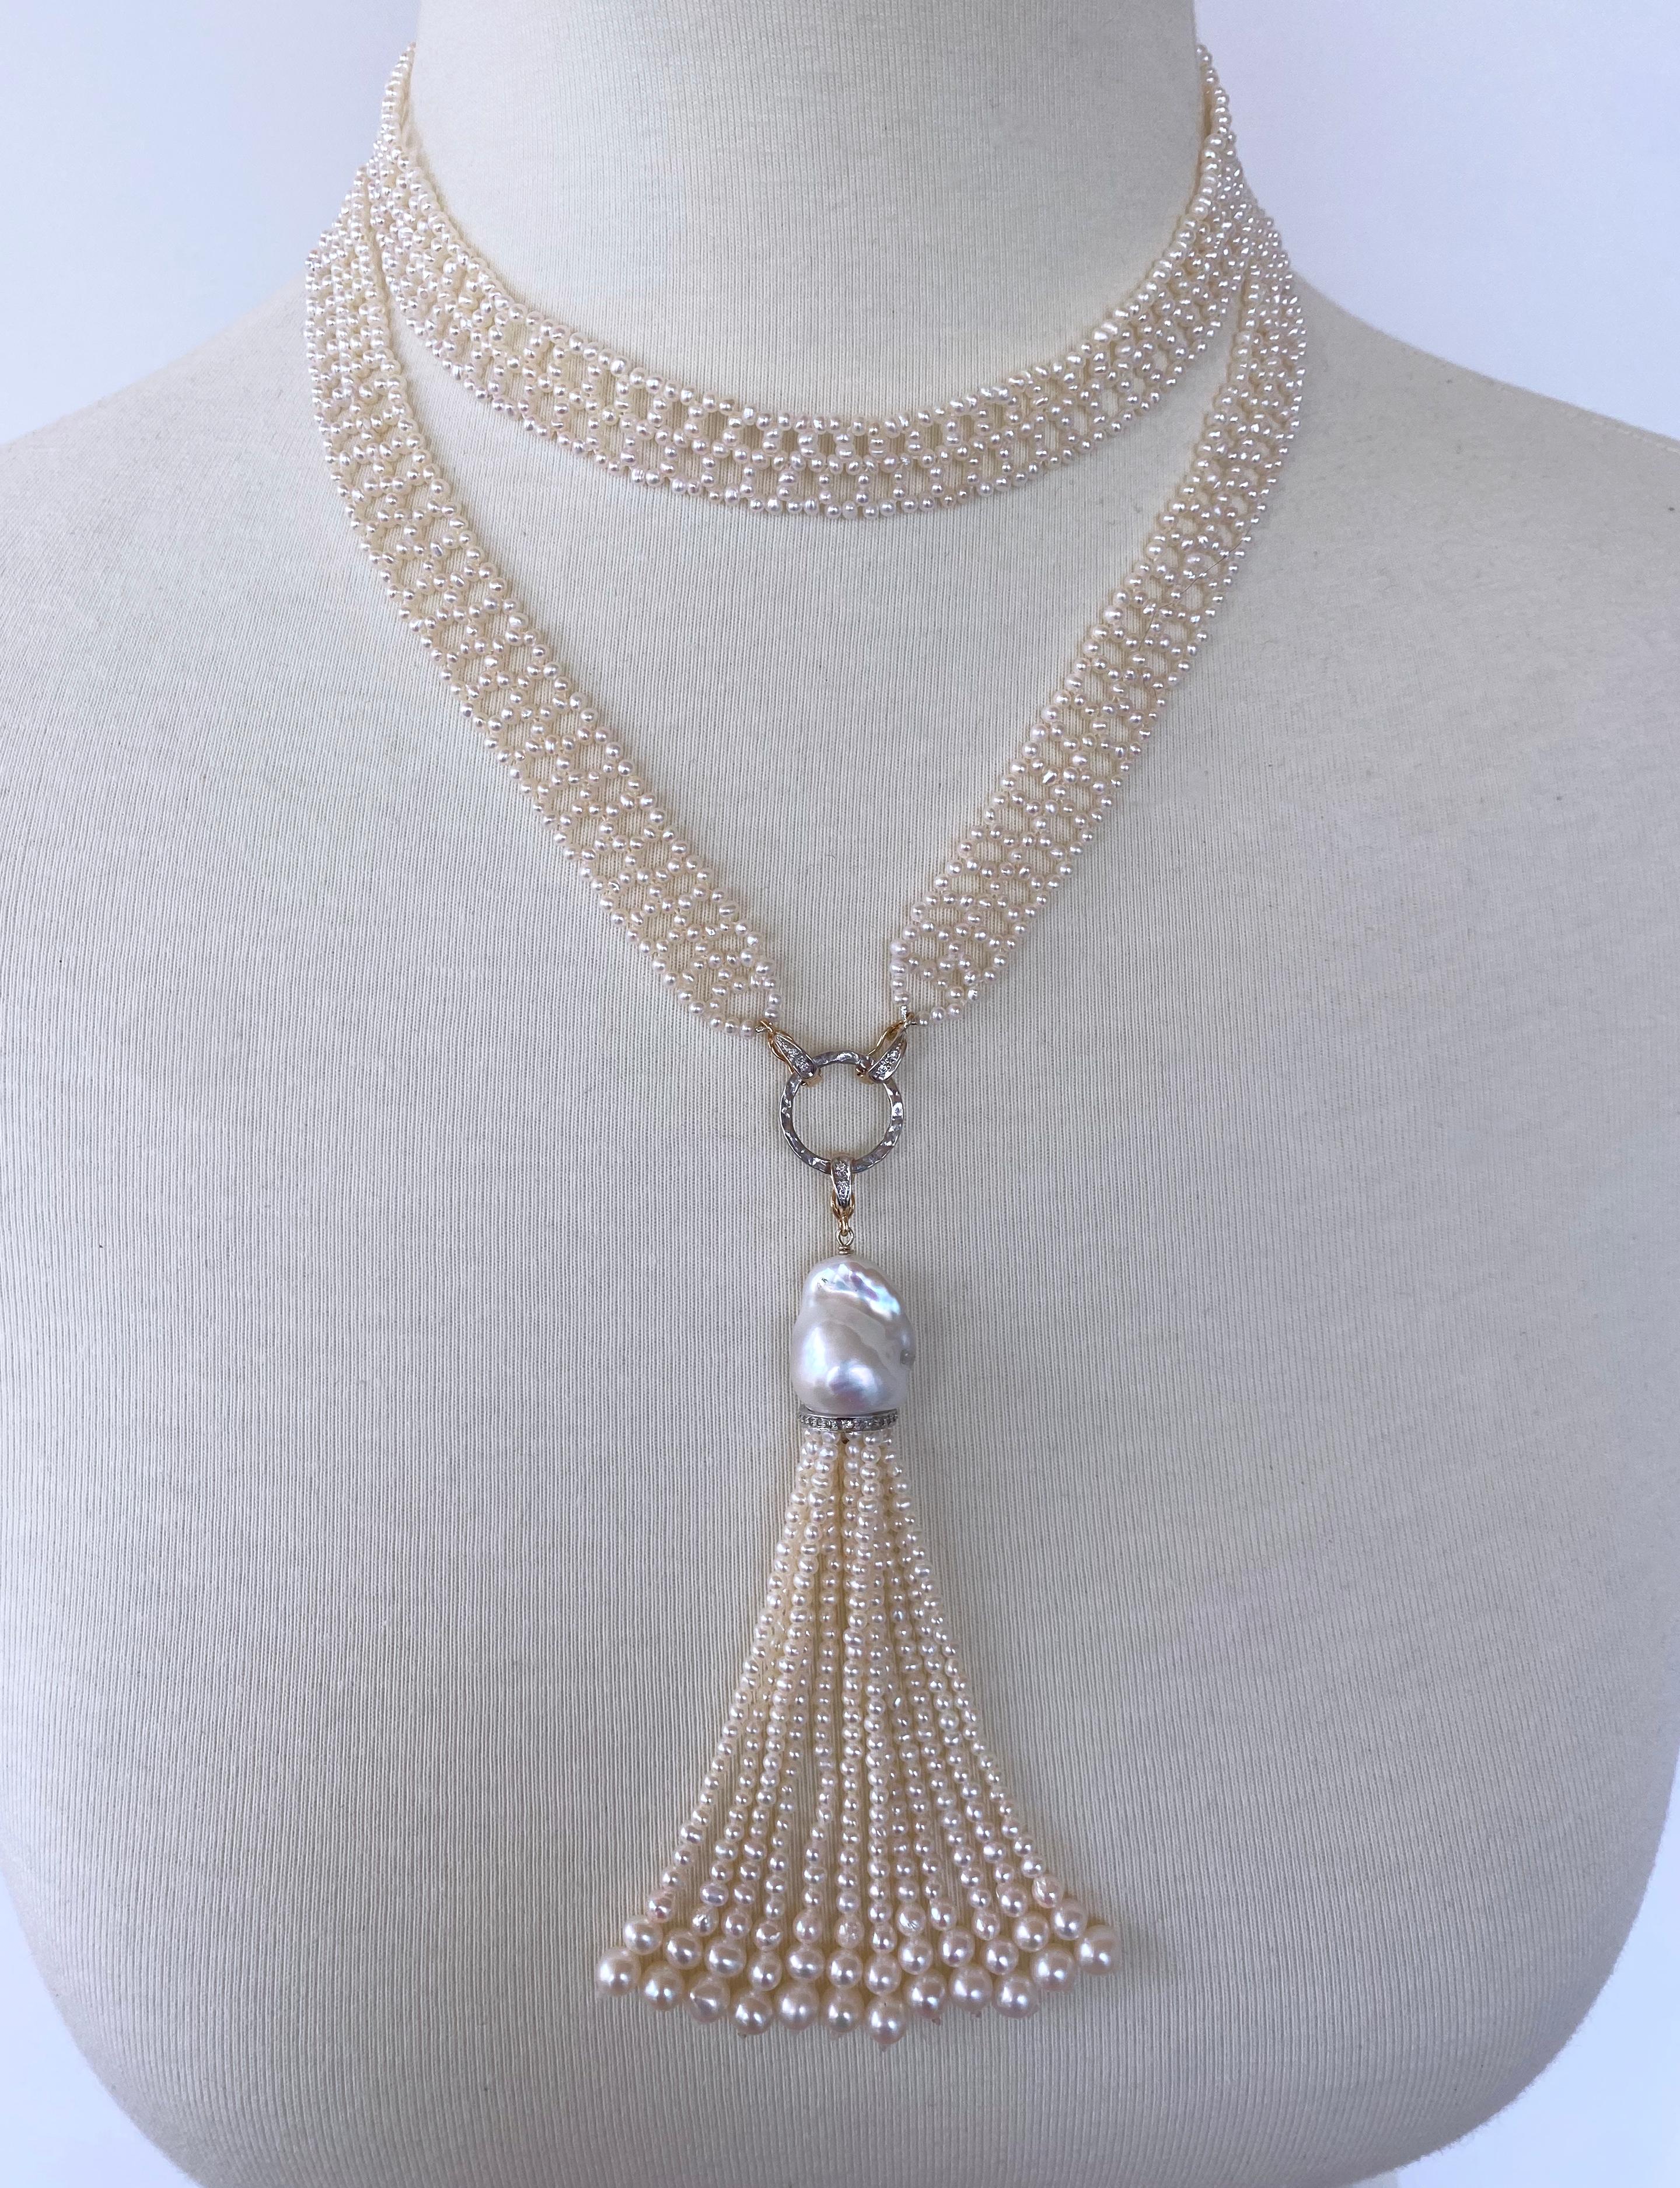 Artisan Marina J. Woven Pearl Lace Sautoir with Diamond Encrusted Solid 14k Gold For Sale